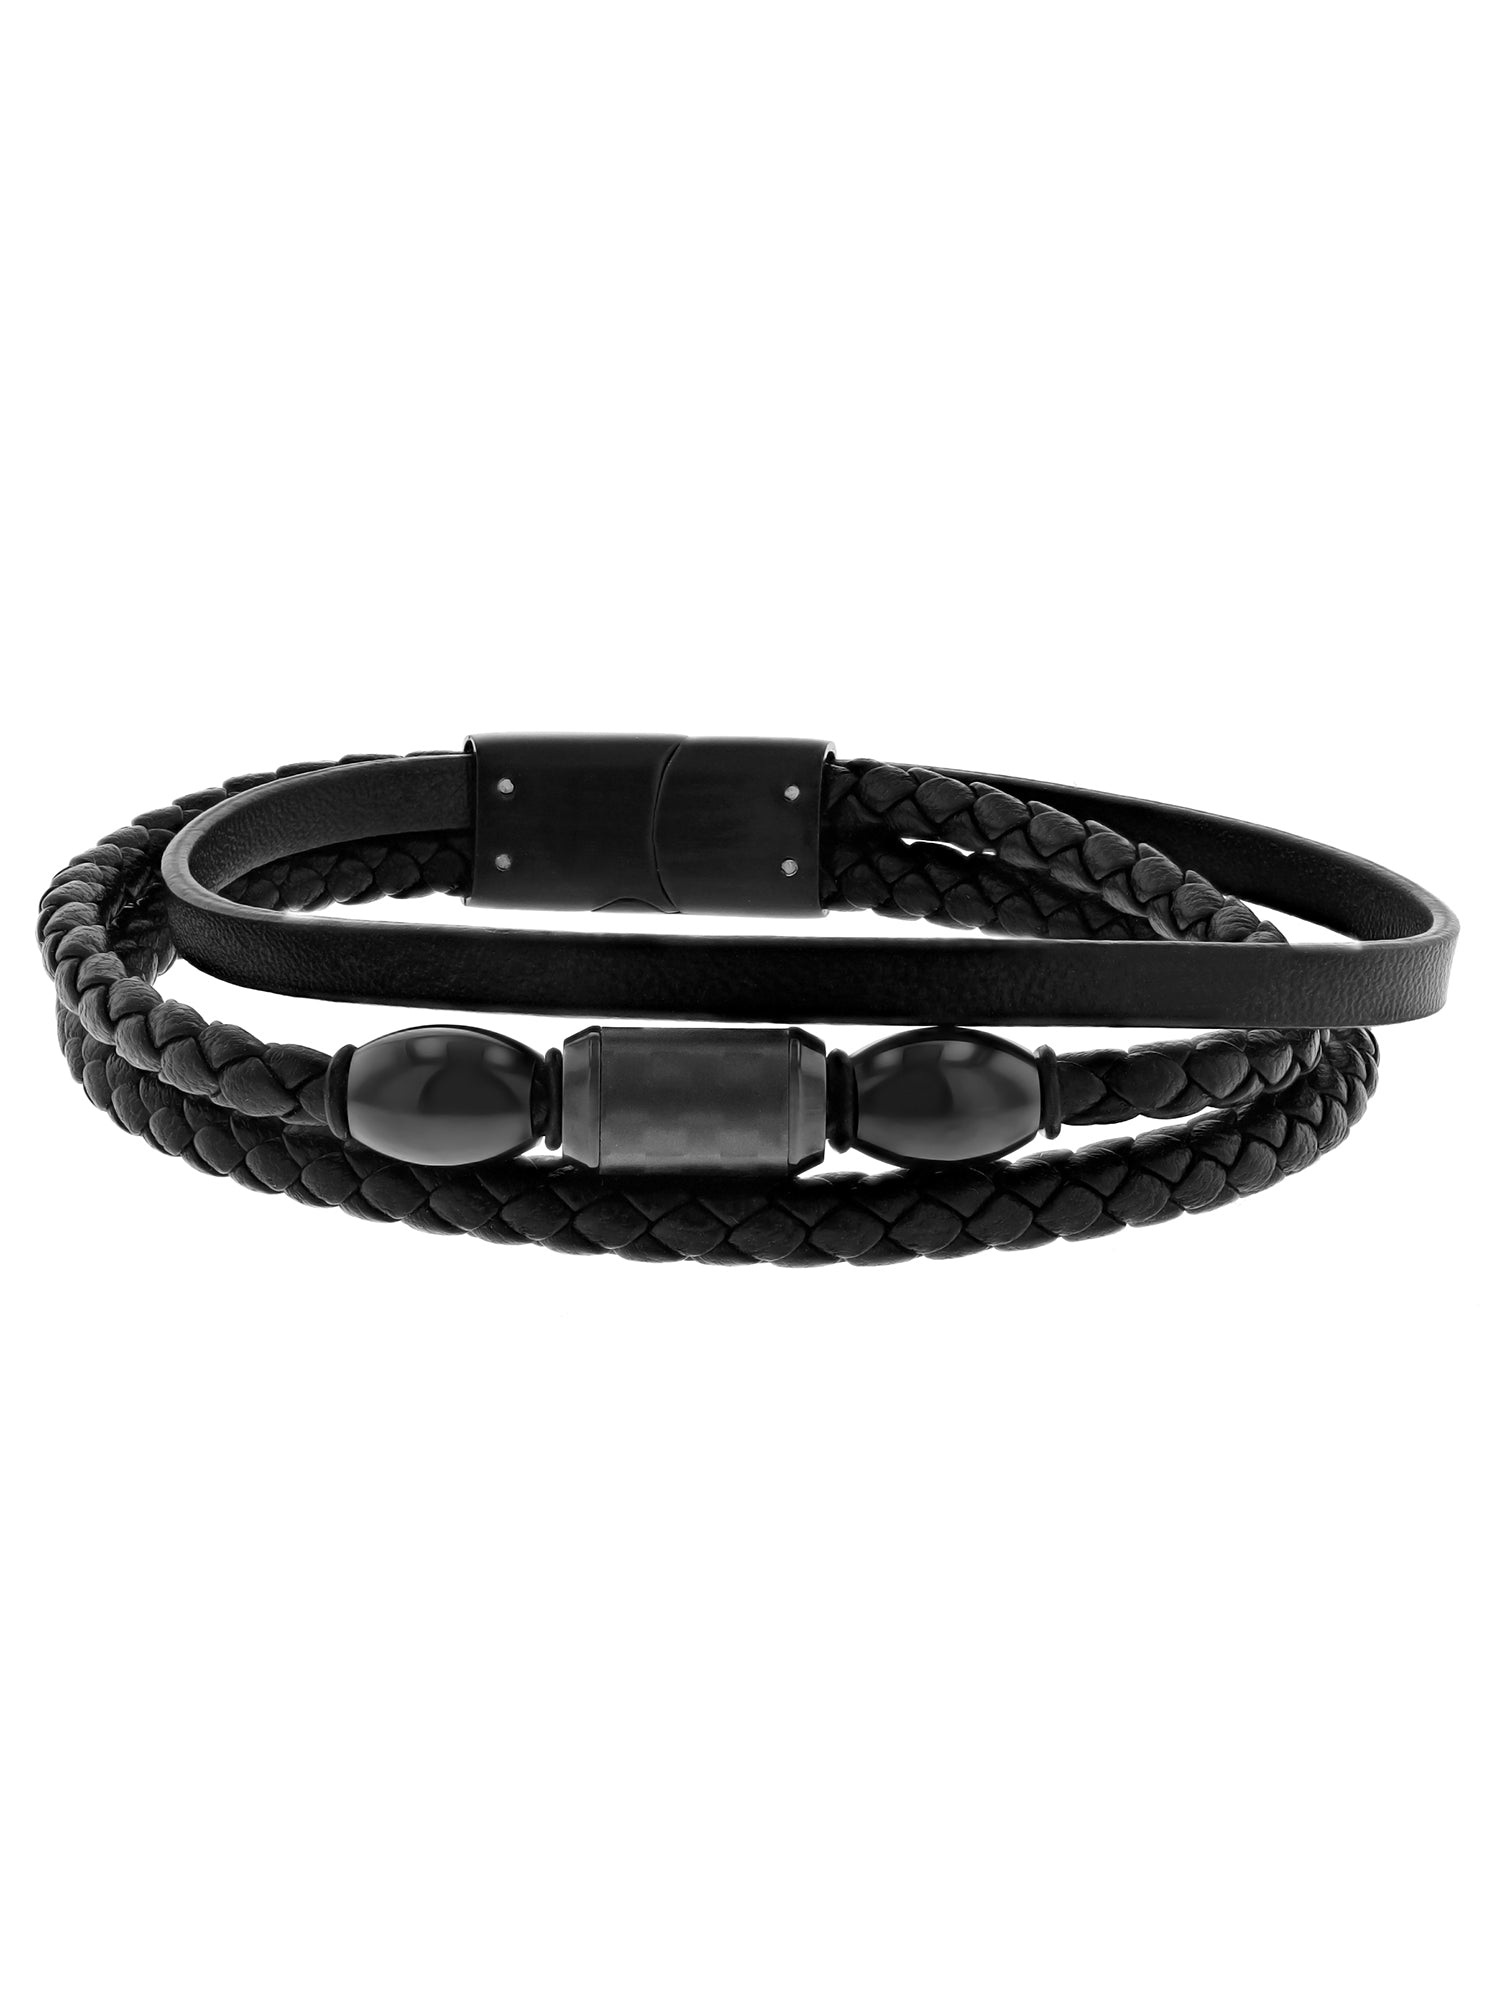 Believe by Brilliance Men’s Black Stainless Steel & Faux Leather Three Strand Bracelet